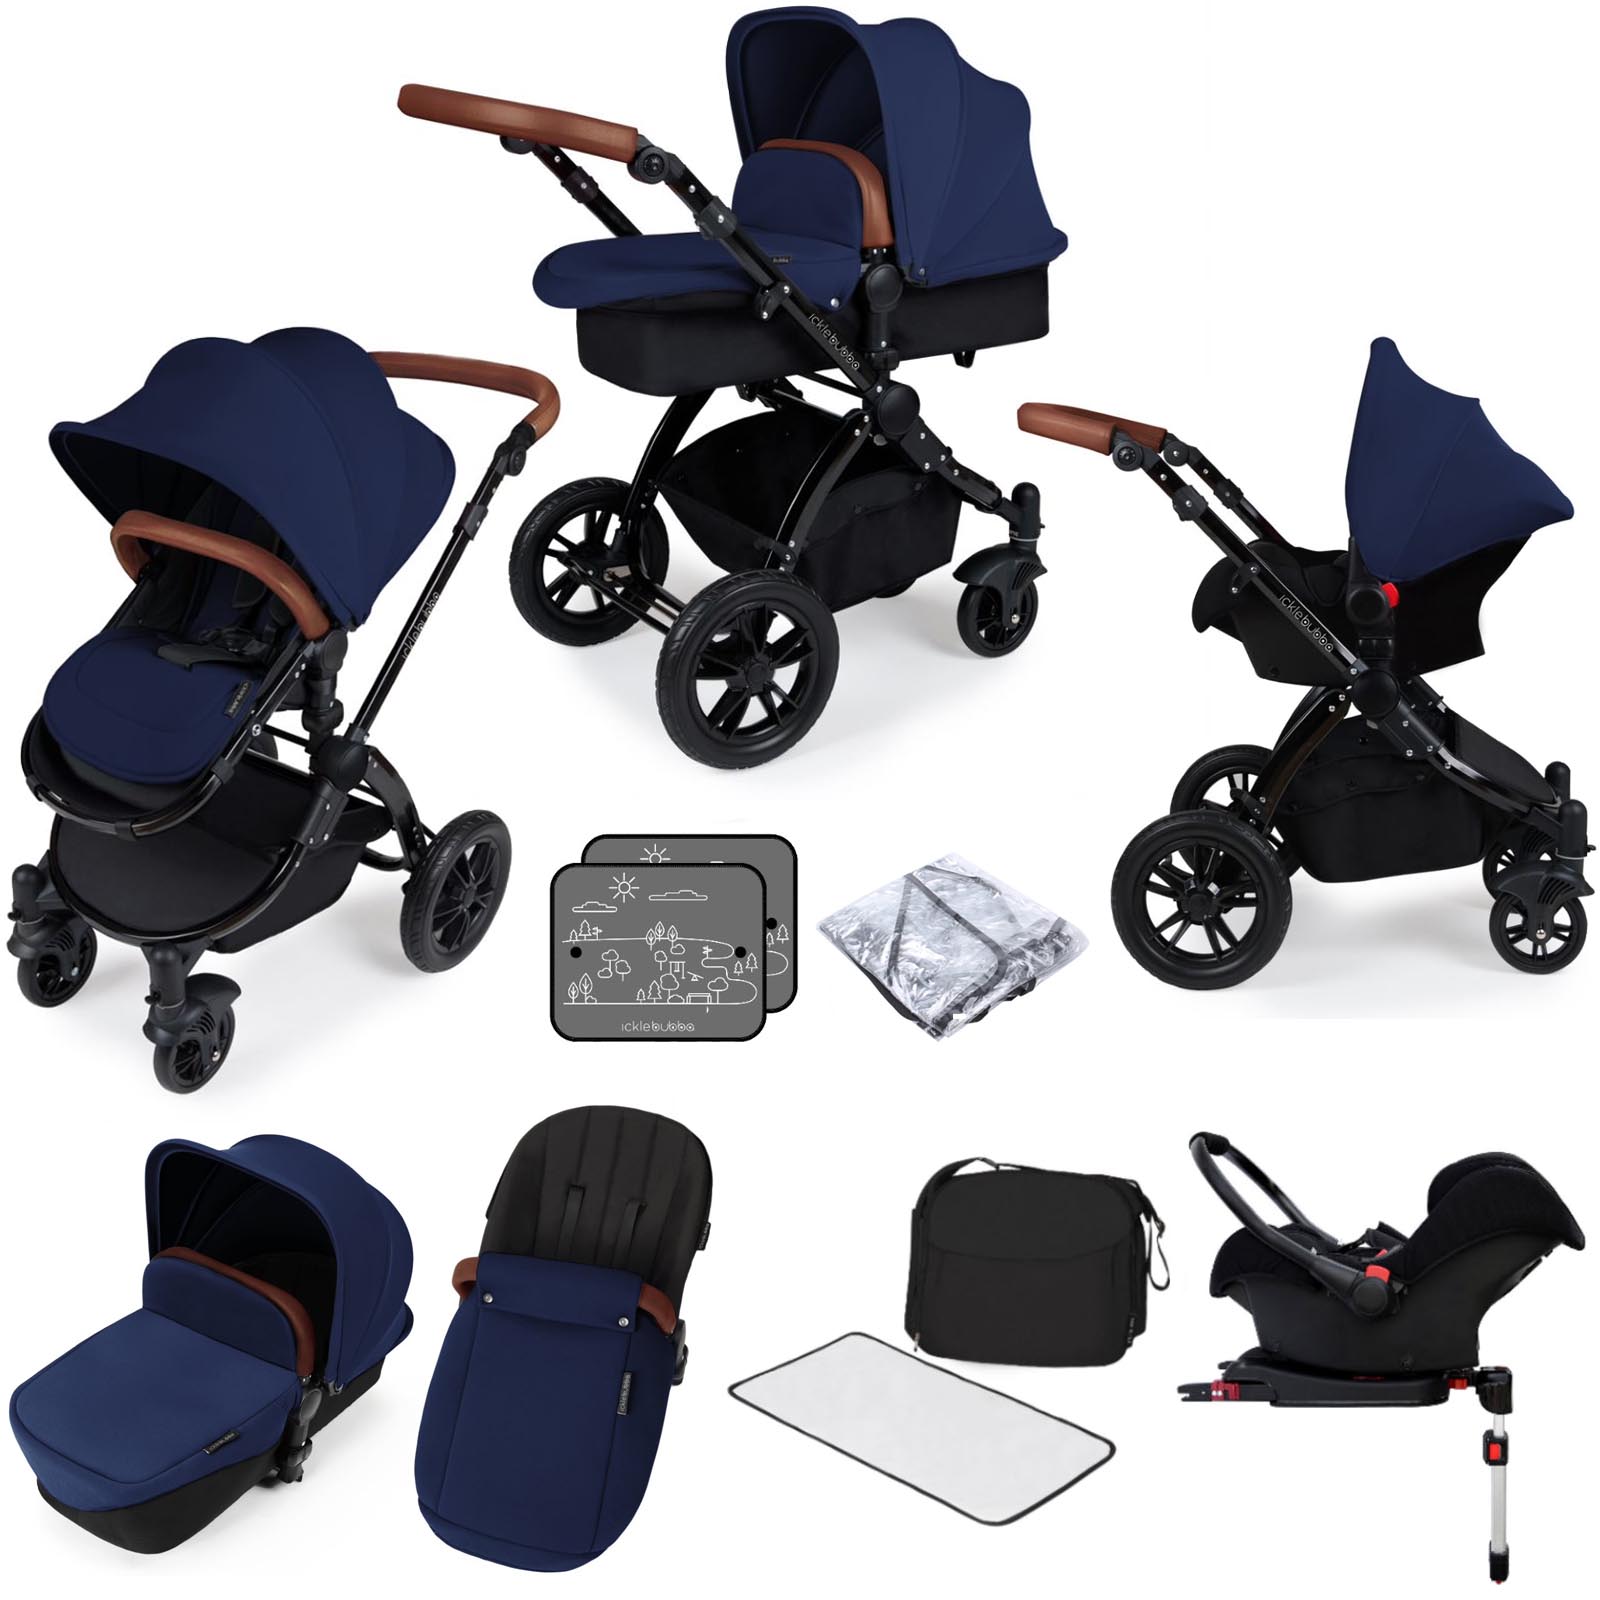 Ickle bubba Stomp V3 Black All In One (Galaxy) 11pc Travel System & Isofix Base - Navy